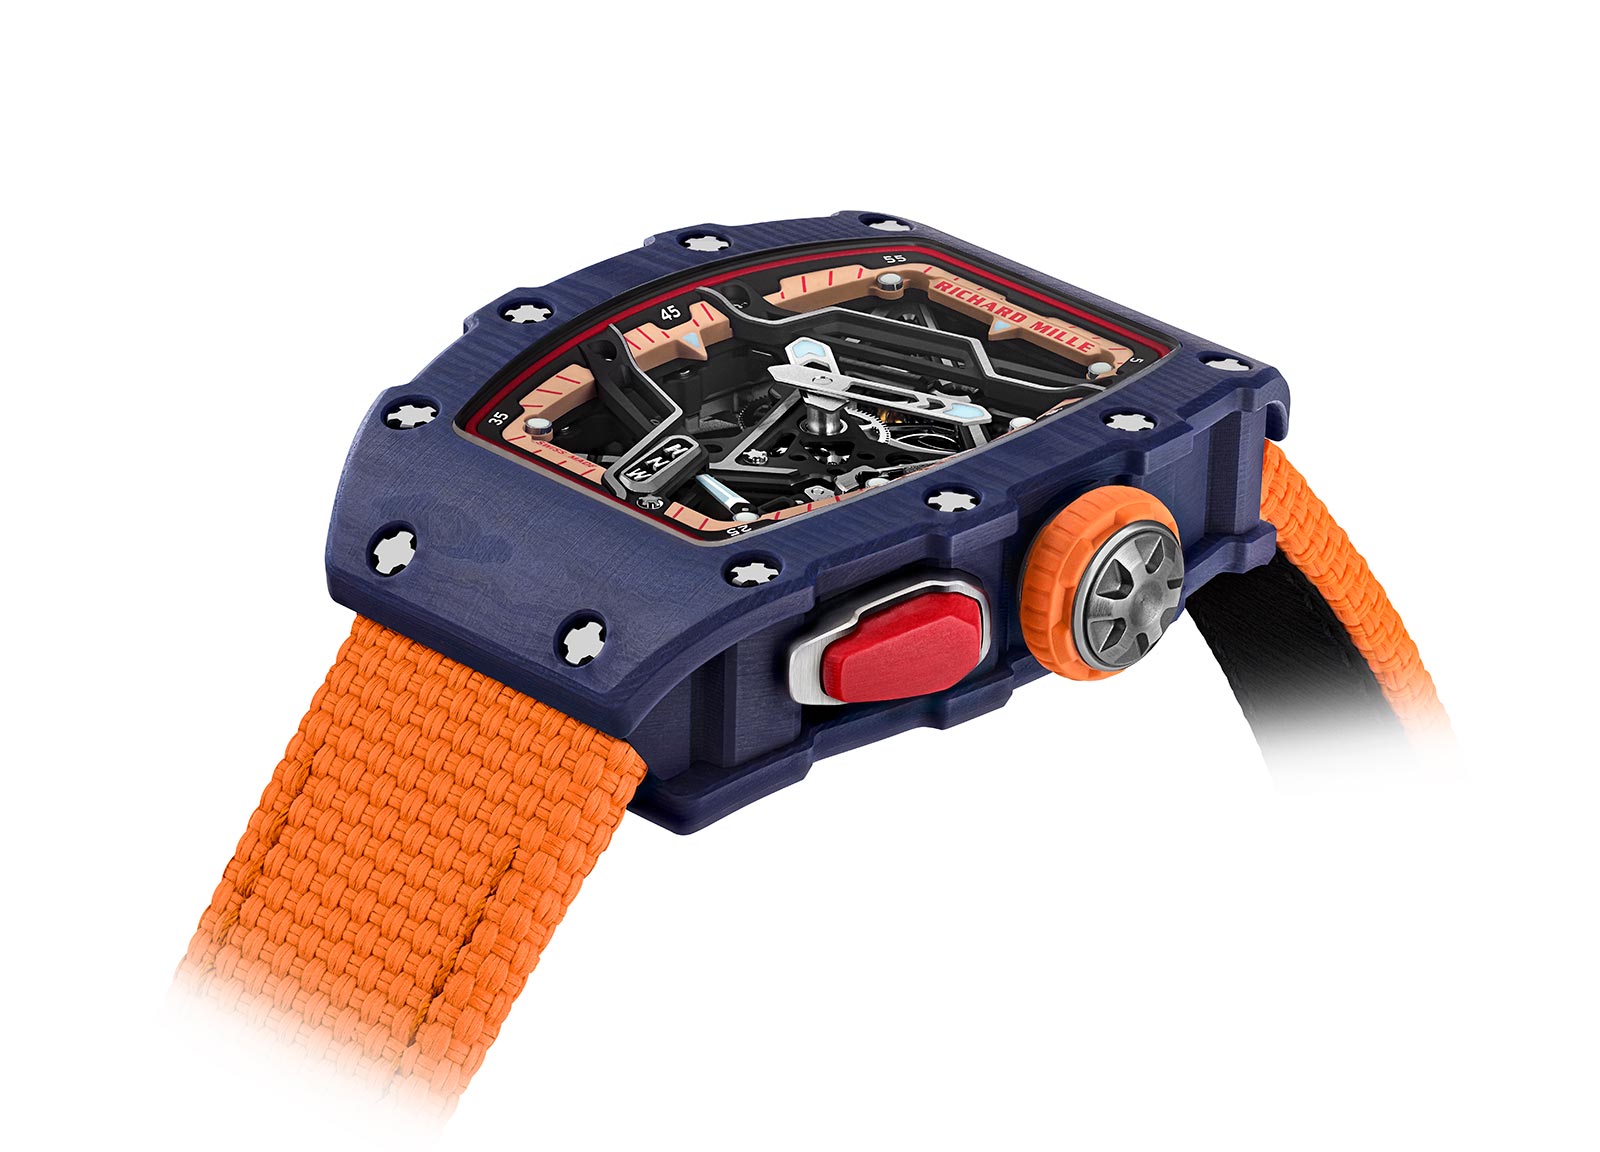 Richard Mille - RM 07-04 Automatic Sport | Time and Watches | The watch blog